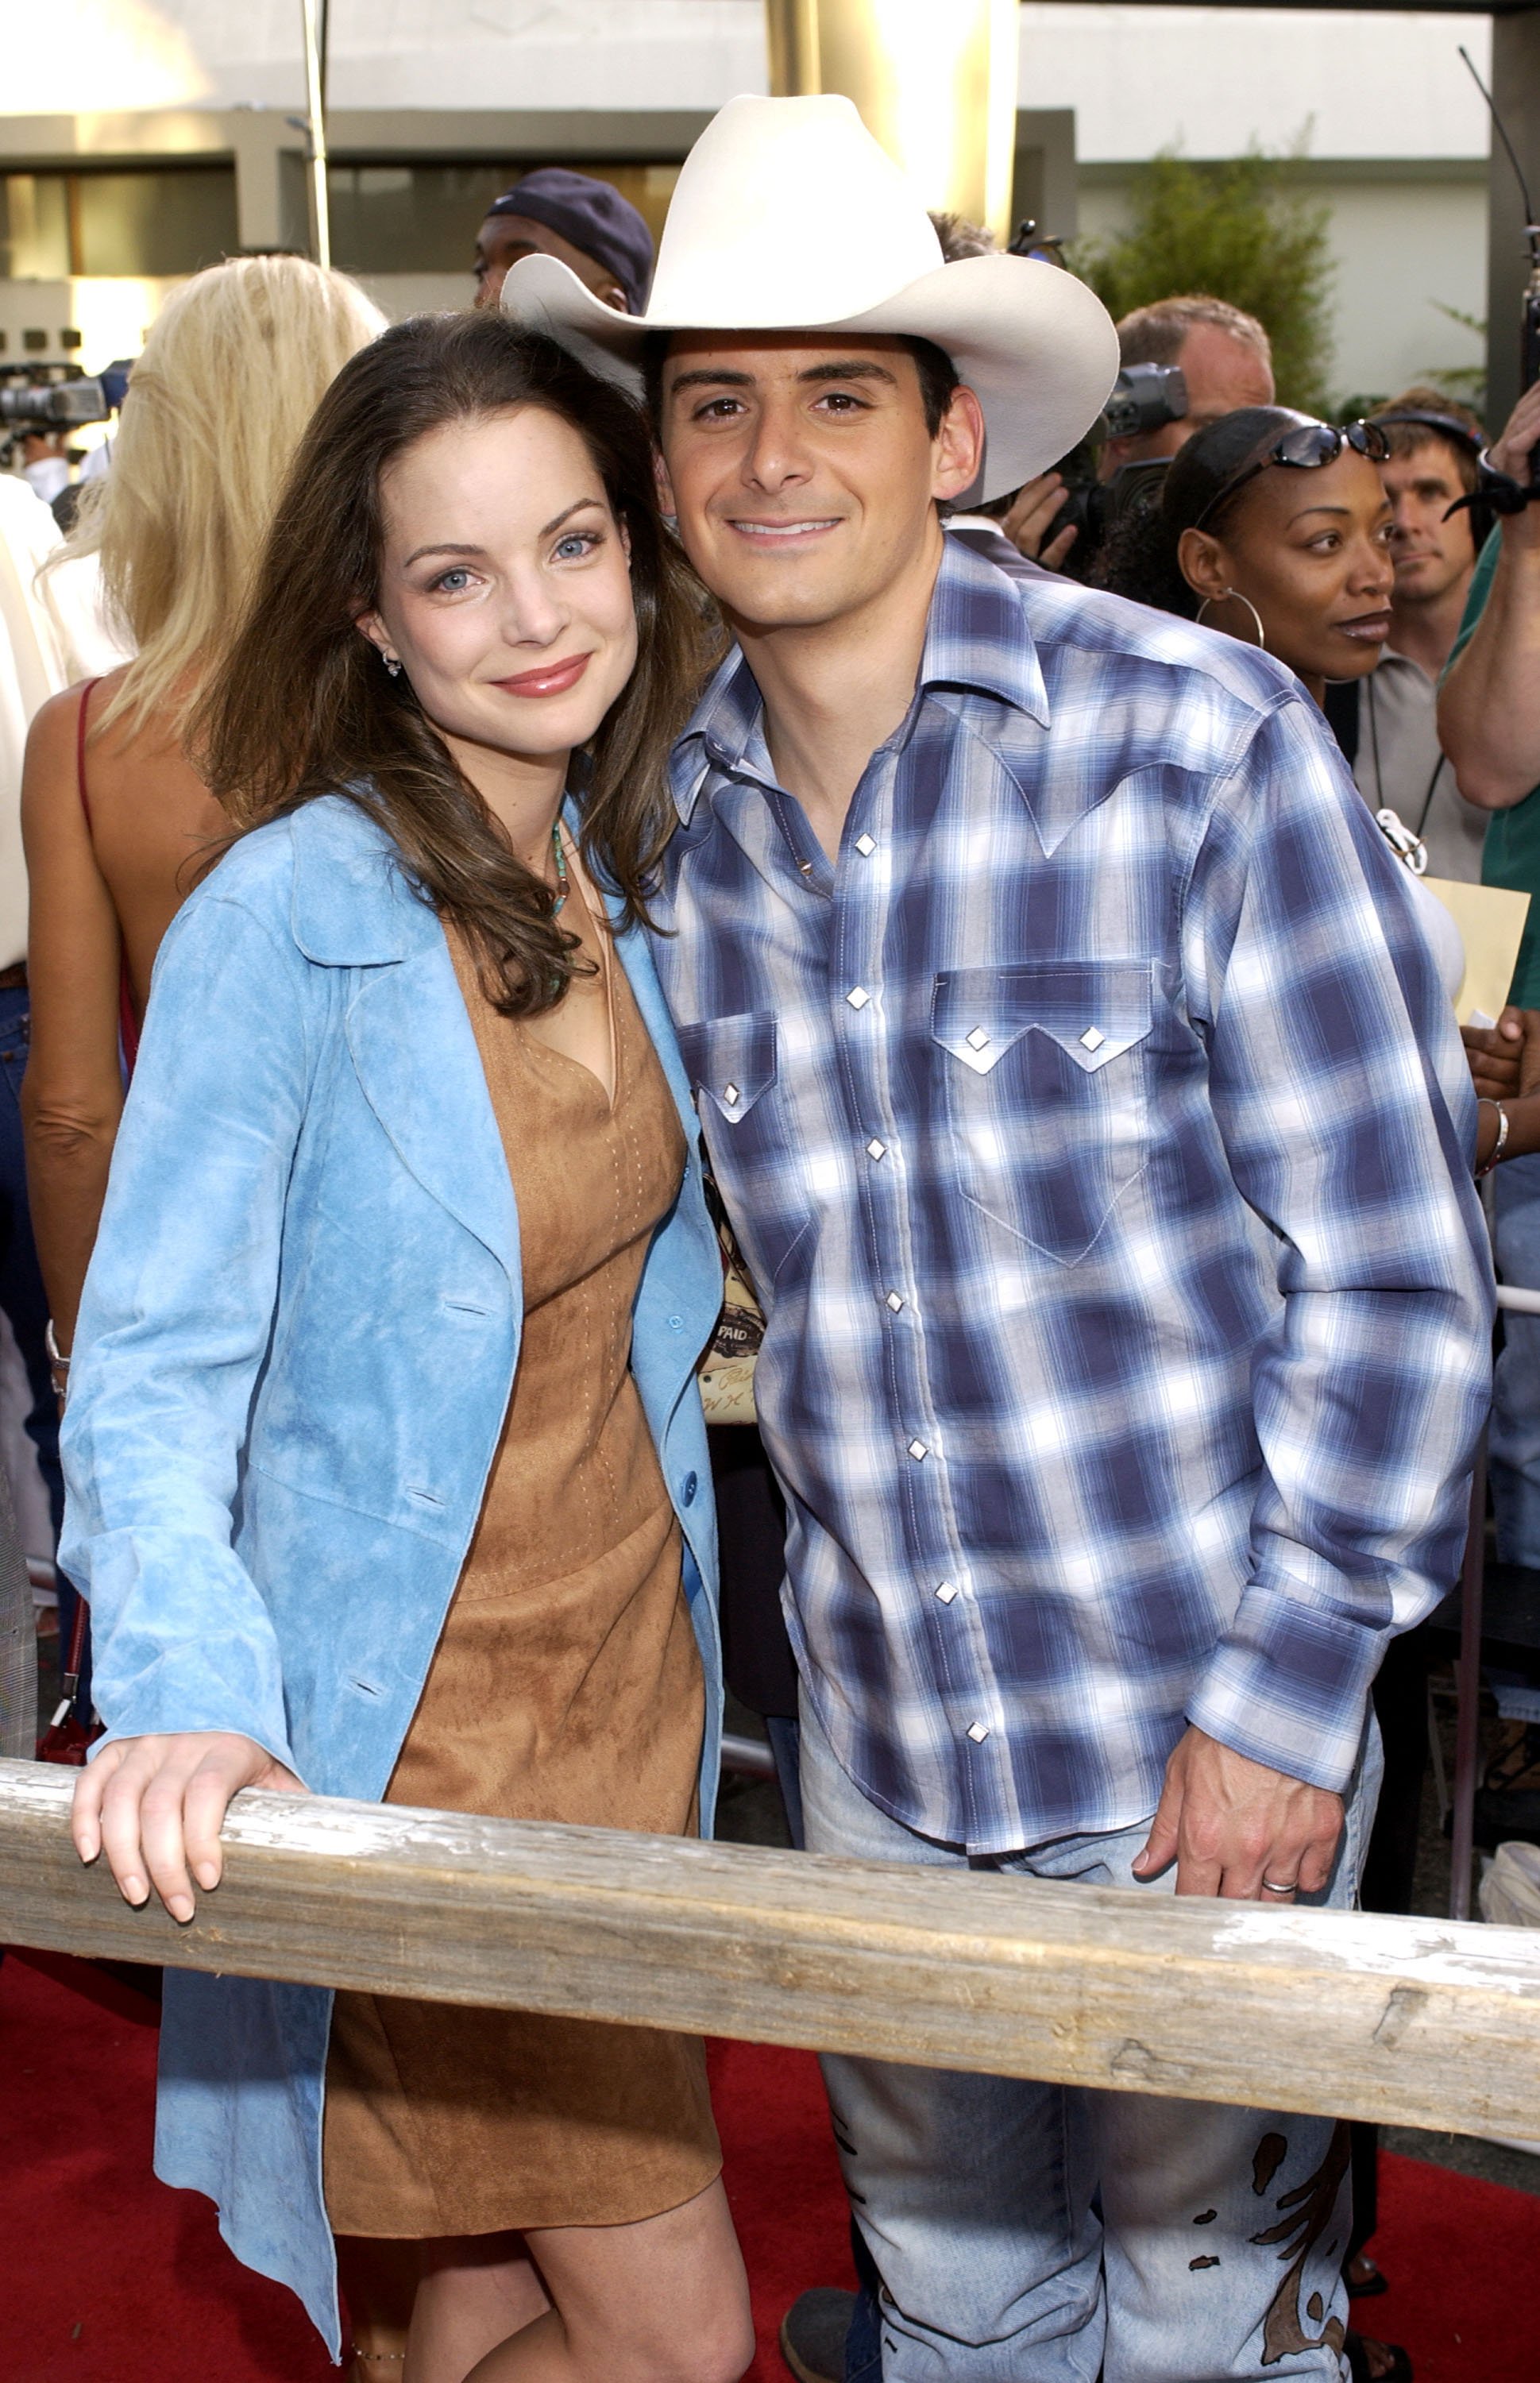 Kimberly Williams and Brad Paisley during "Open Range" Premiere - Red Carpet at Arclight Cinerama Dome in Los Angeles, California, United States. | Source: Getty Images